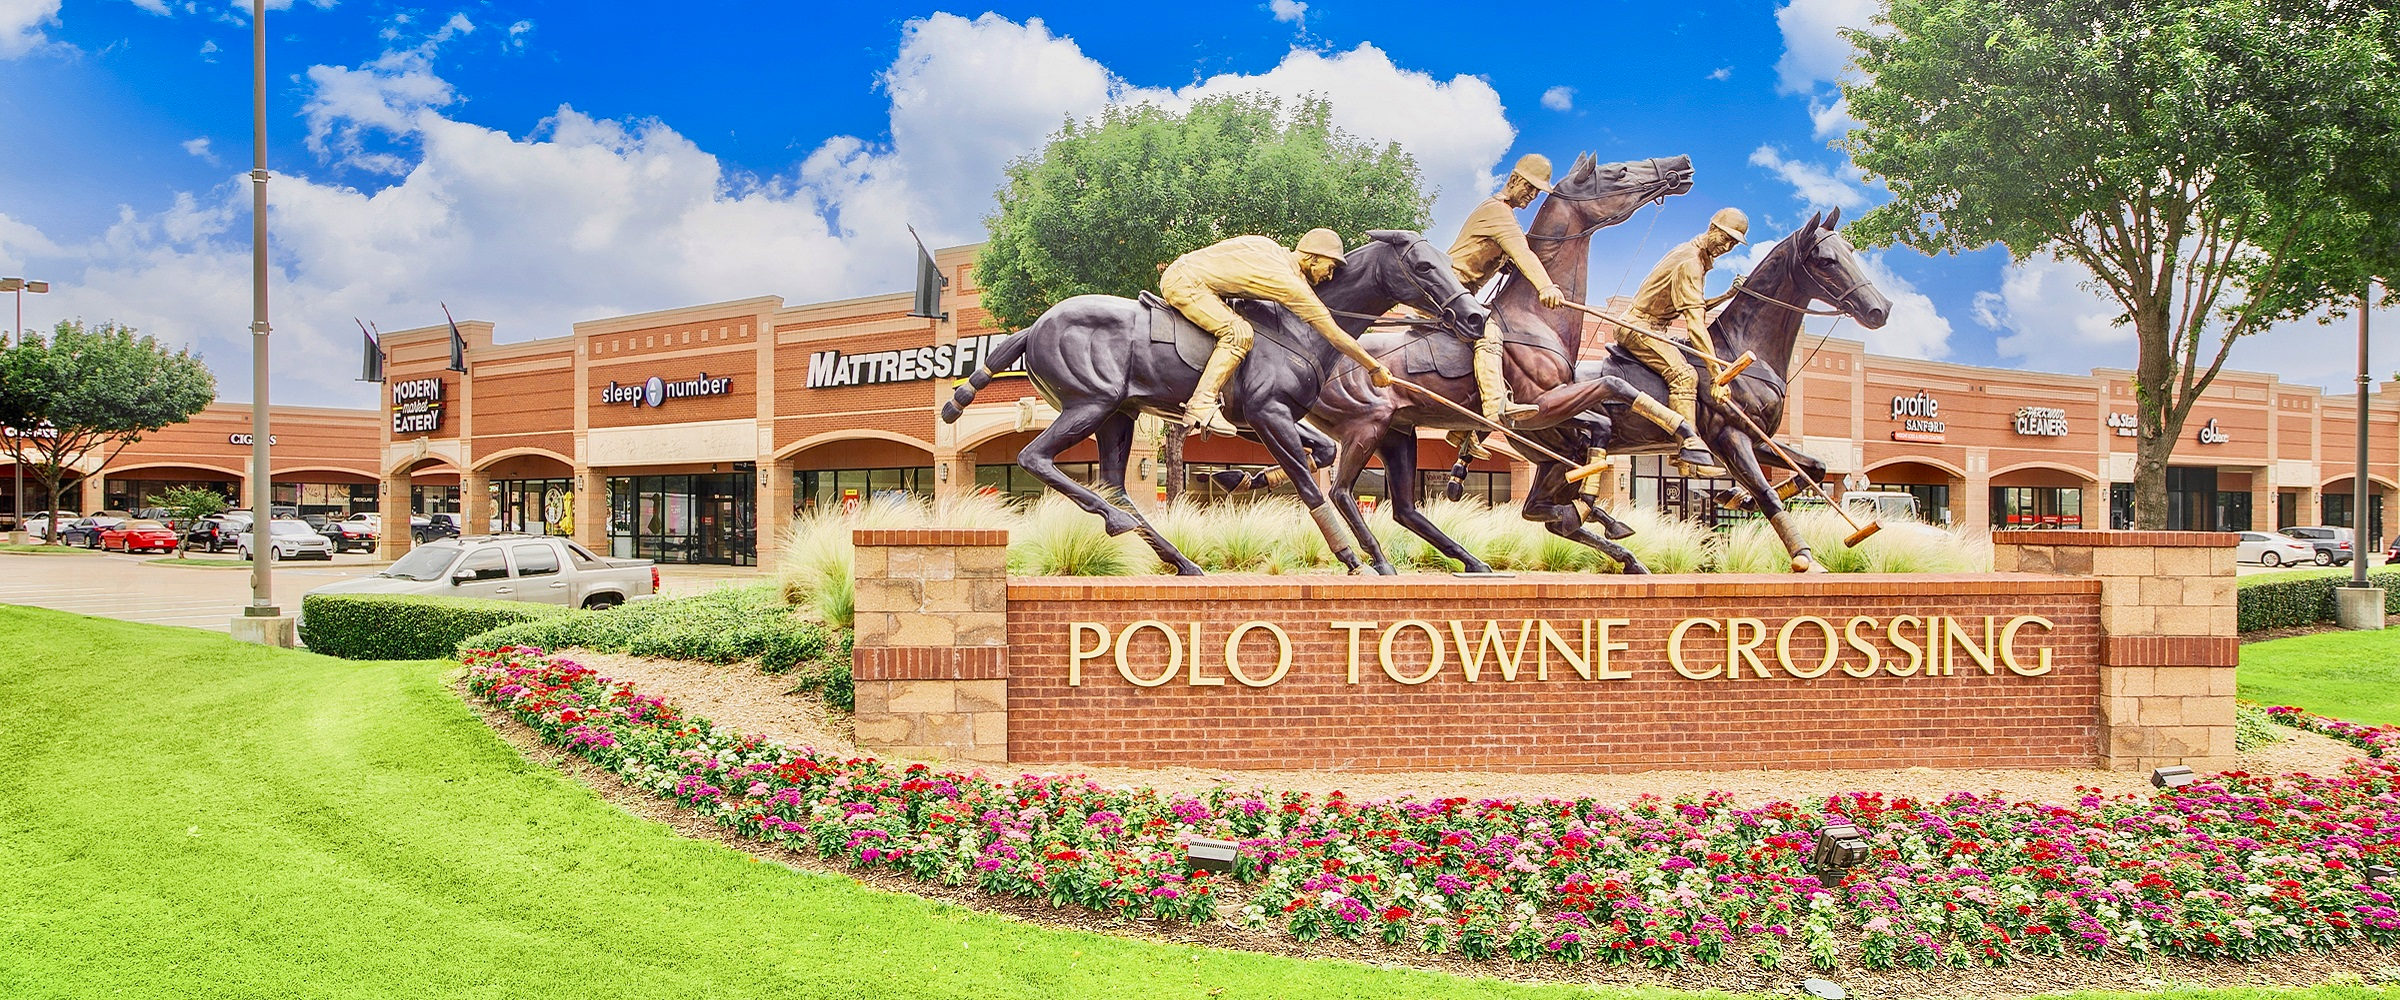 US Property Trust - Polo Towne Crossing